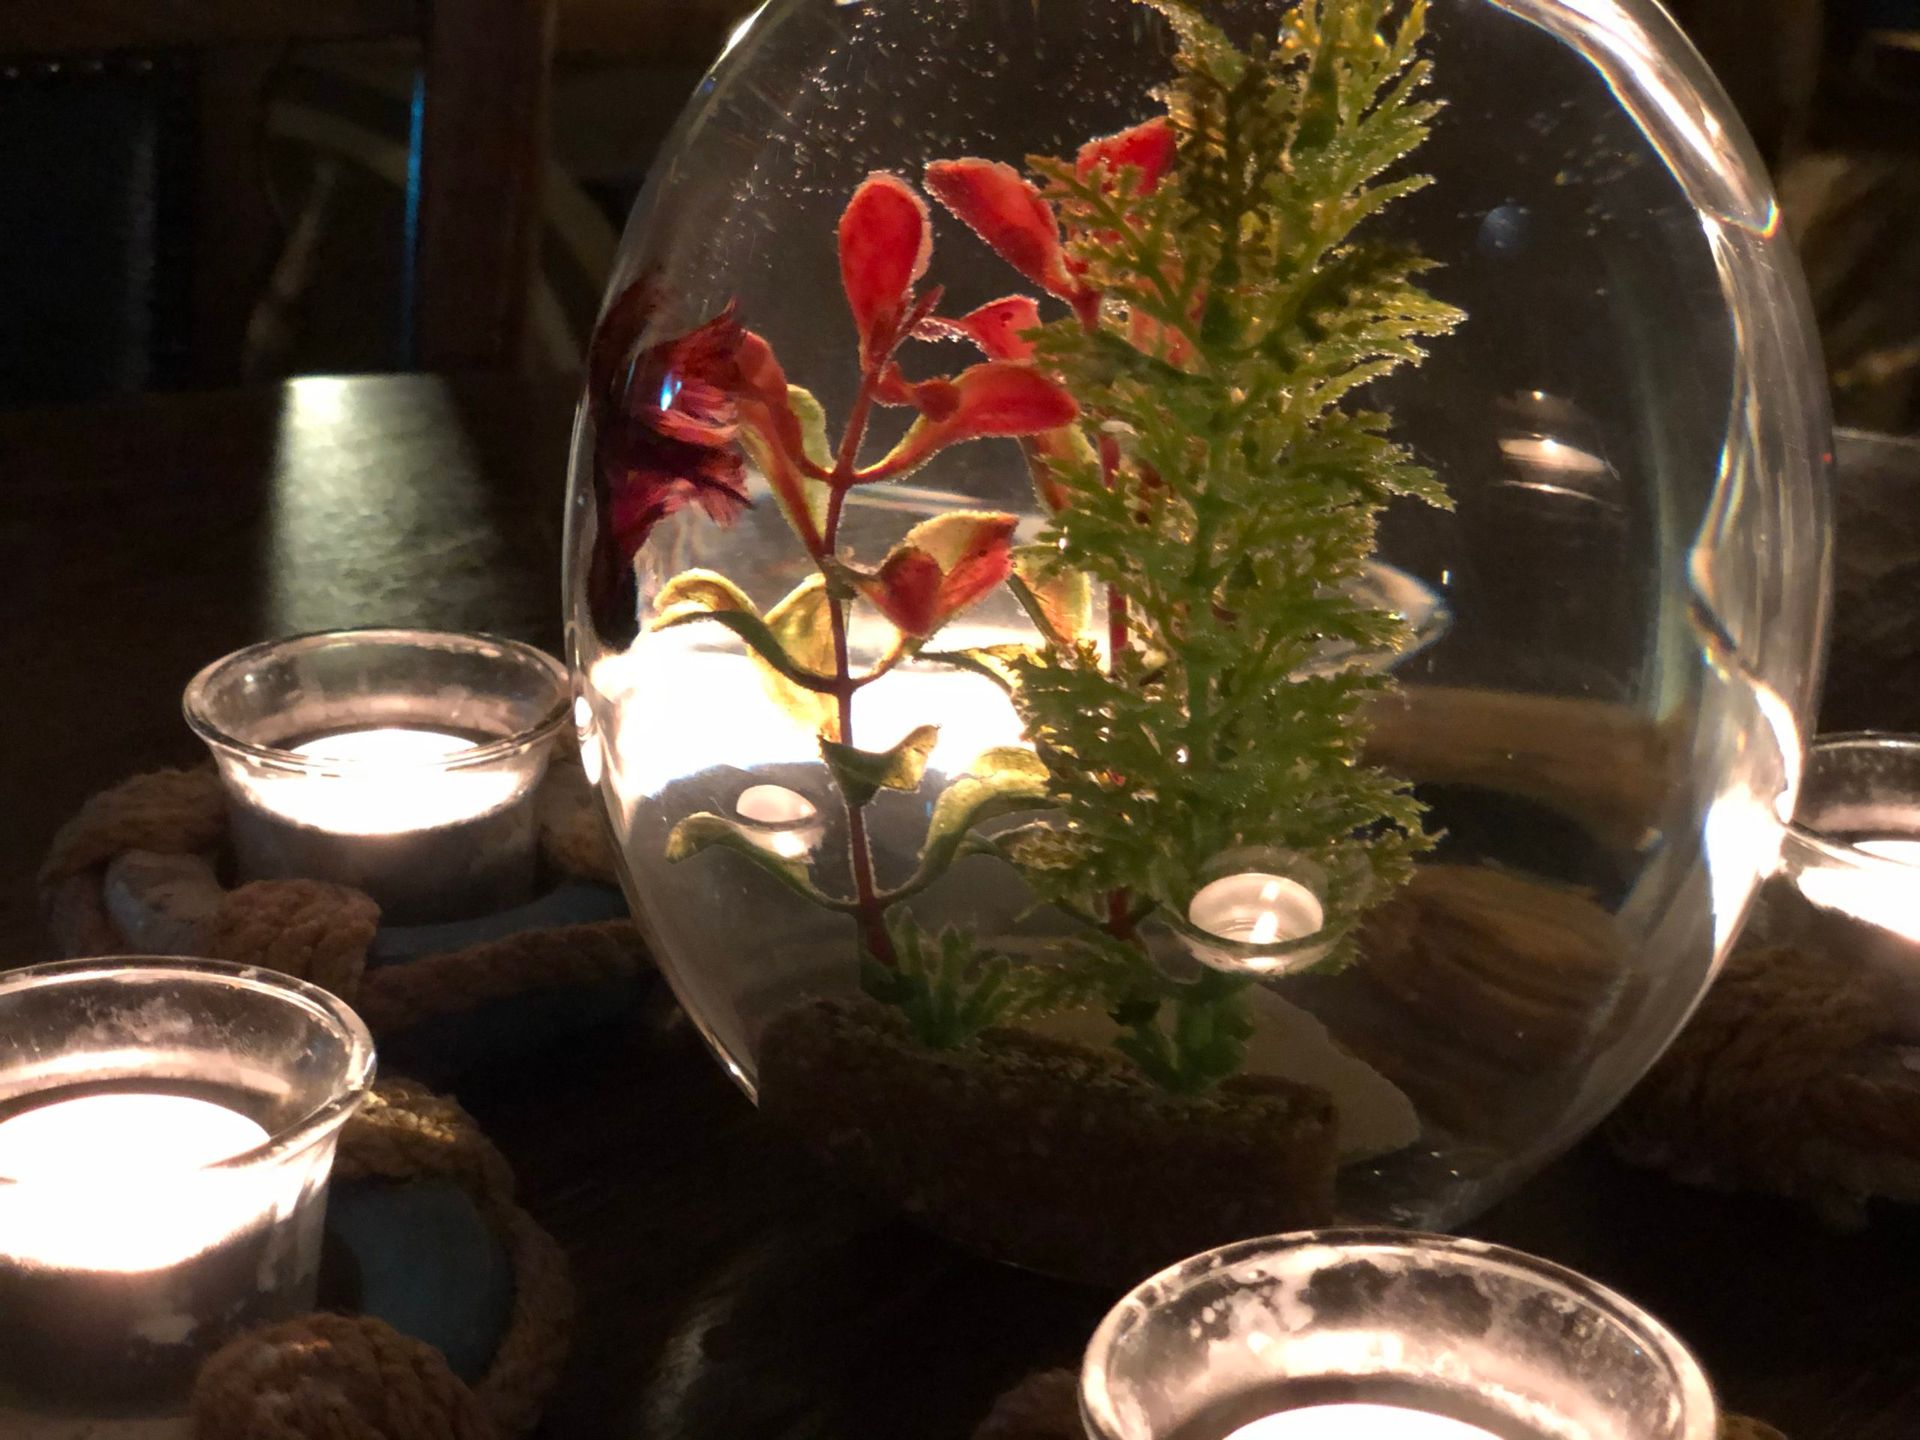 Fish bowl on table with candles